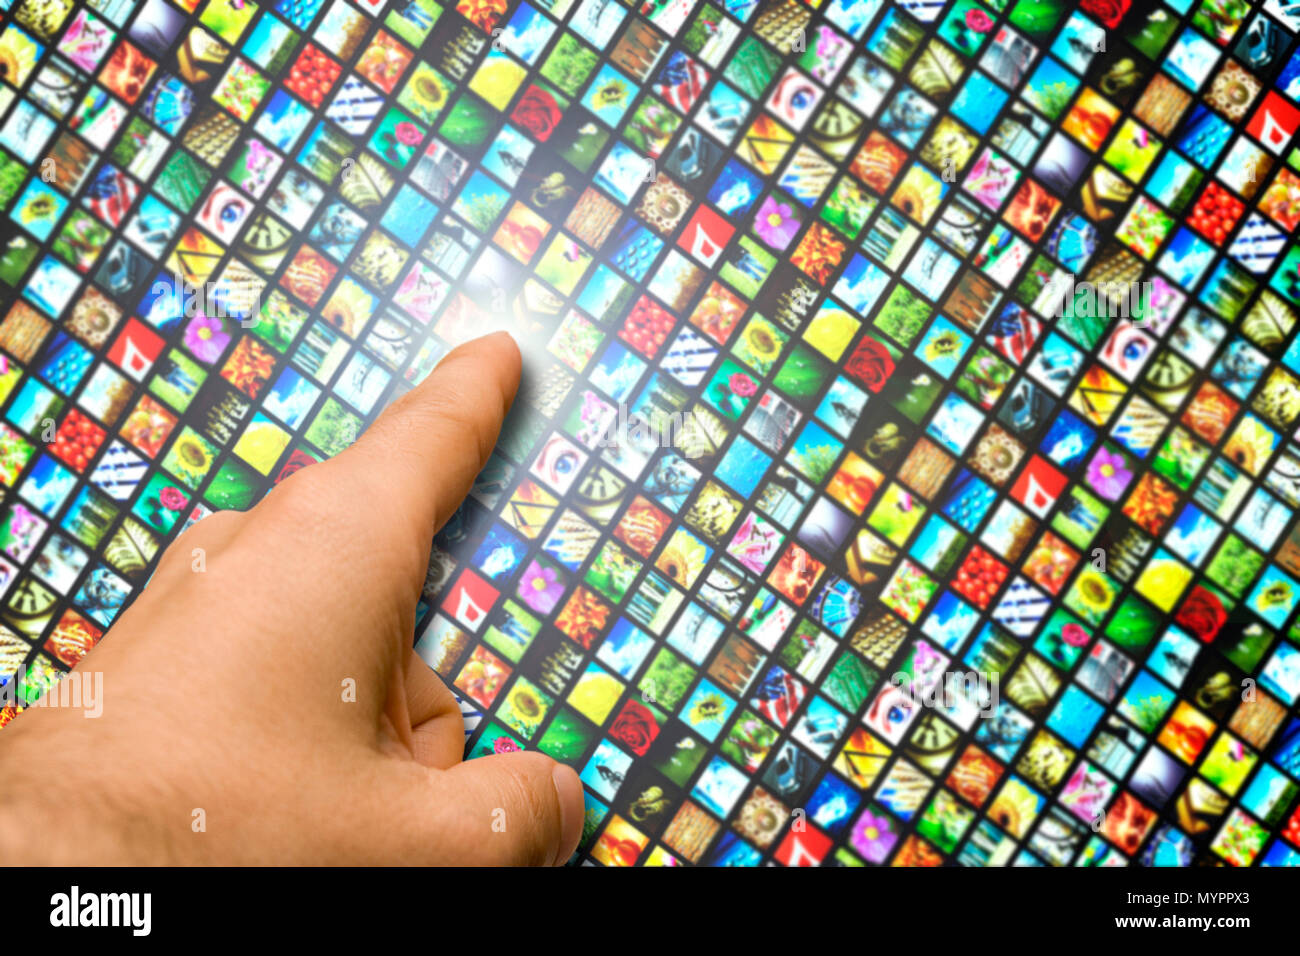 male hand touching with the finger a wall of multiple colorful video screens, concept for digital broadcasting or internet television Stock Photo